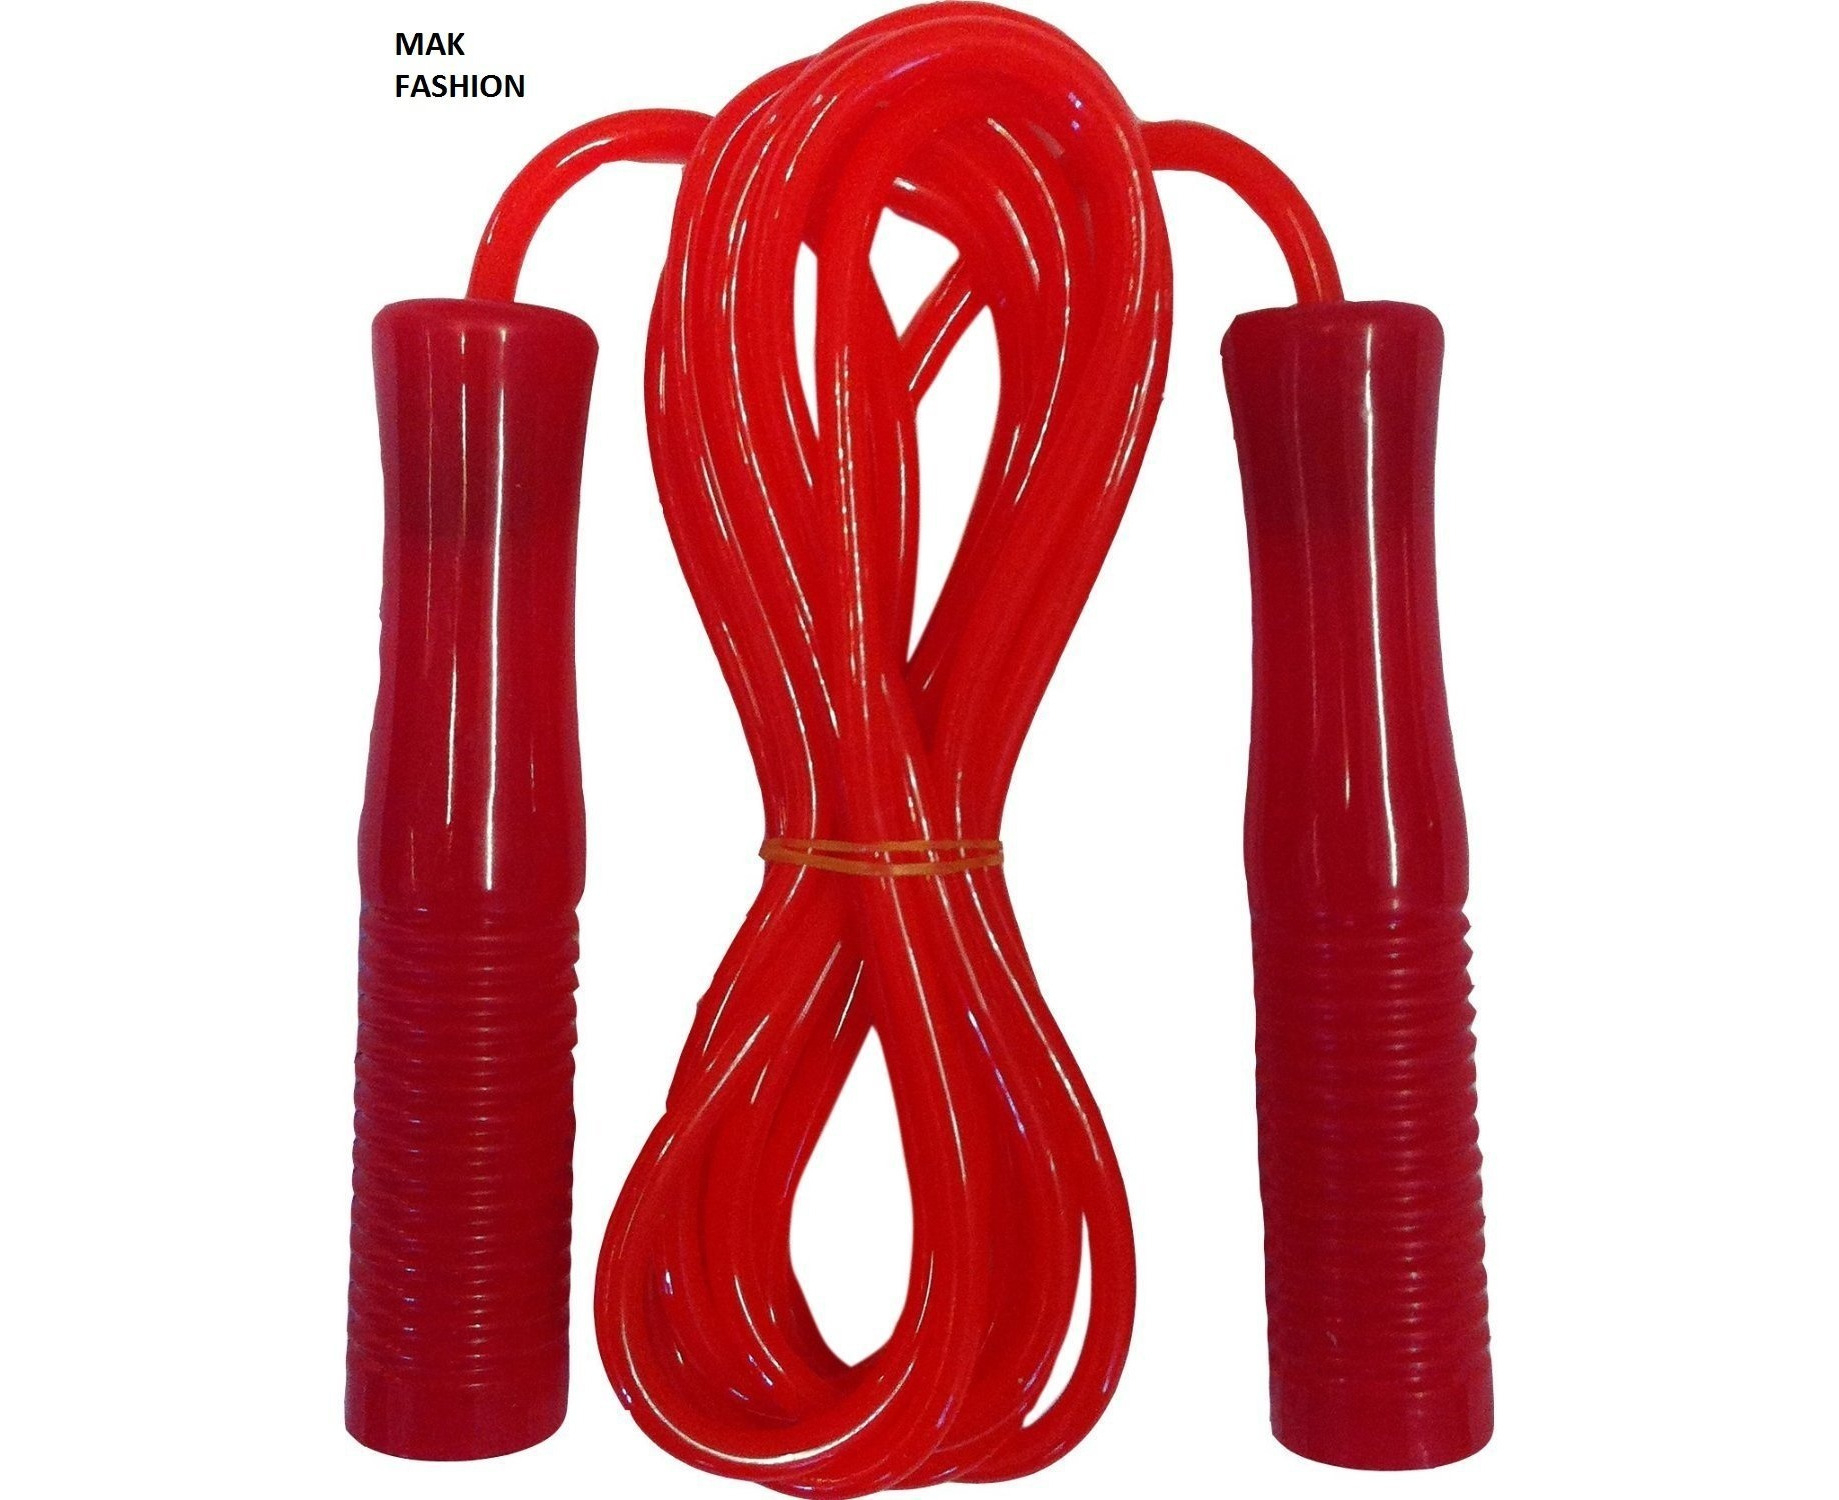 fitnessXzone PLASTIC SKIPPING ROPE JUMP SPEED EXERCISE ROPE FITNESS 